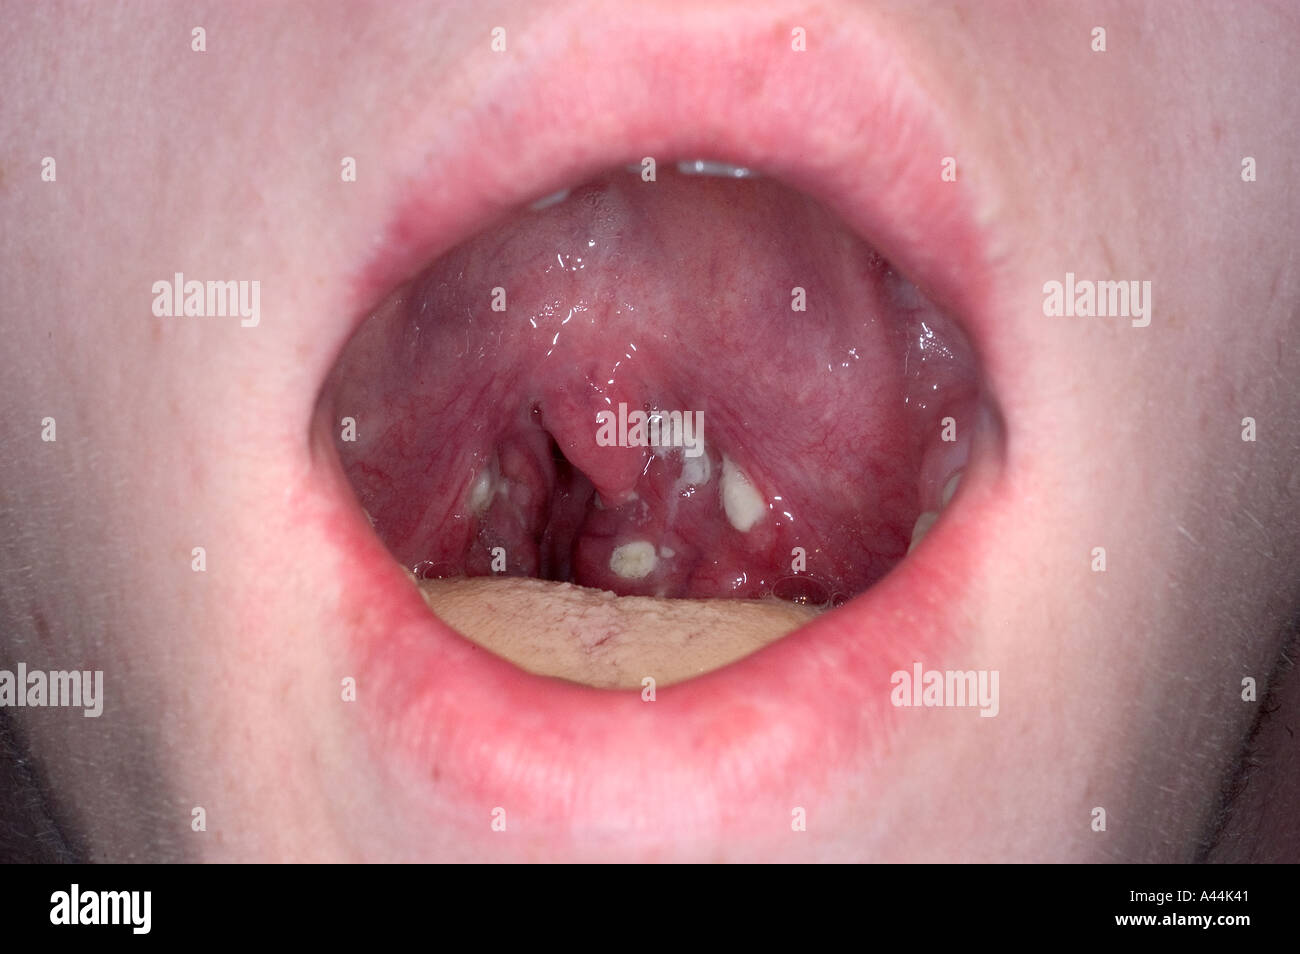 Pictures Of Strept Throat 42